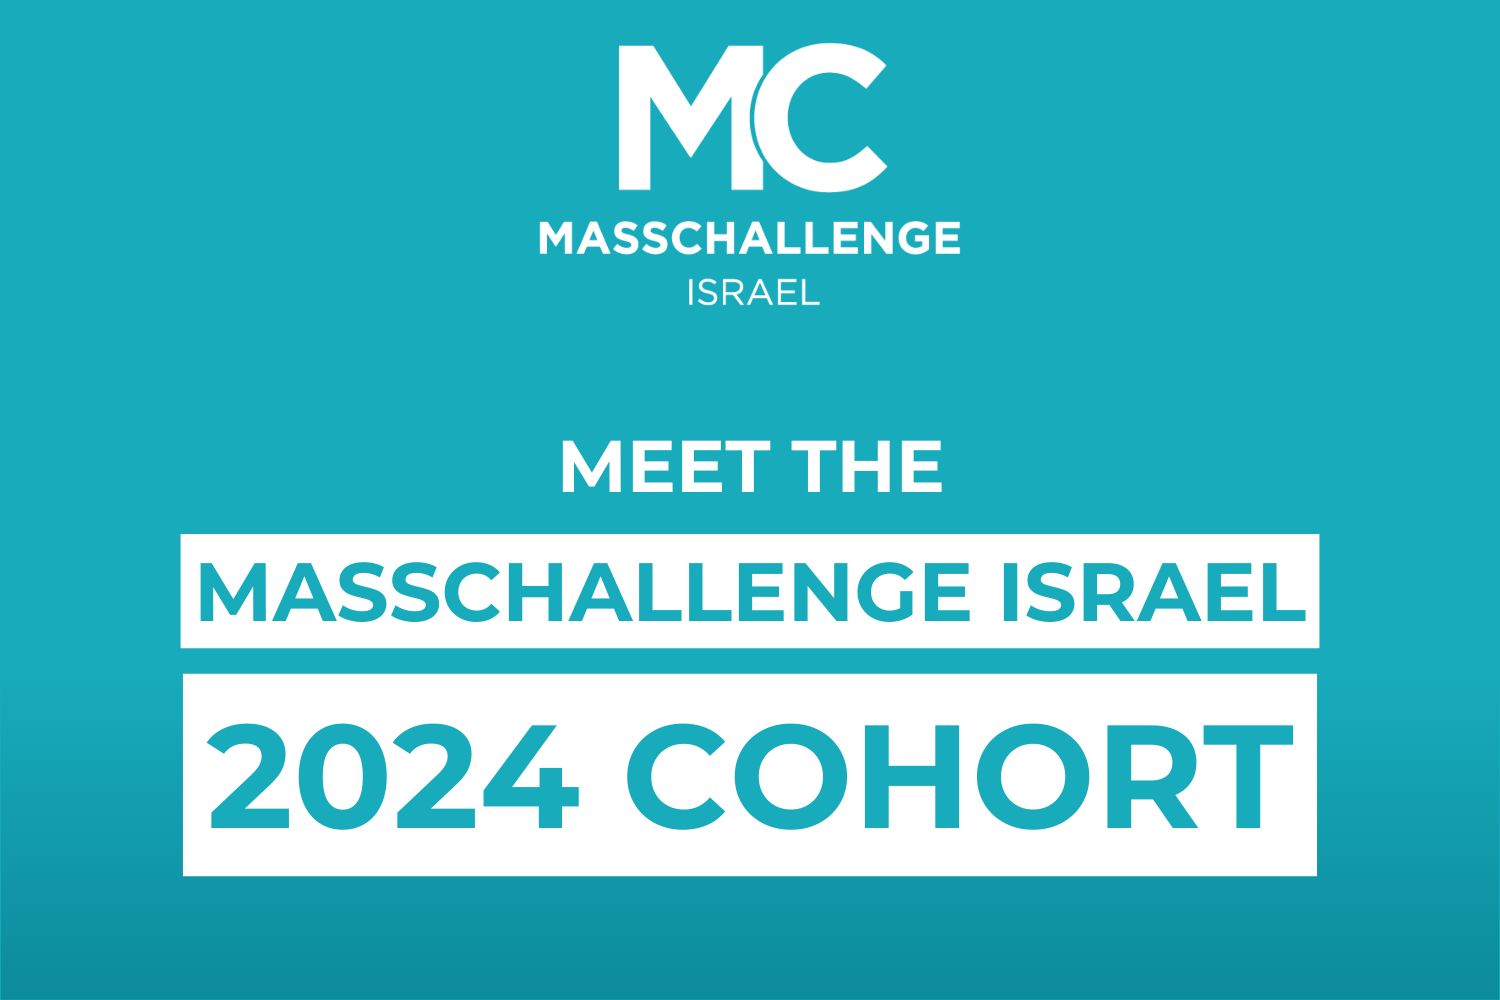 replantin’ was chosen to the prestigious list of promising startups participating in the MassChallange Israel 2024